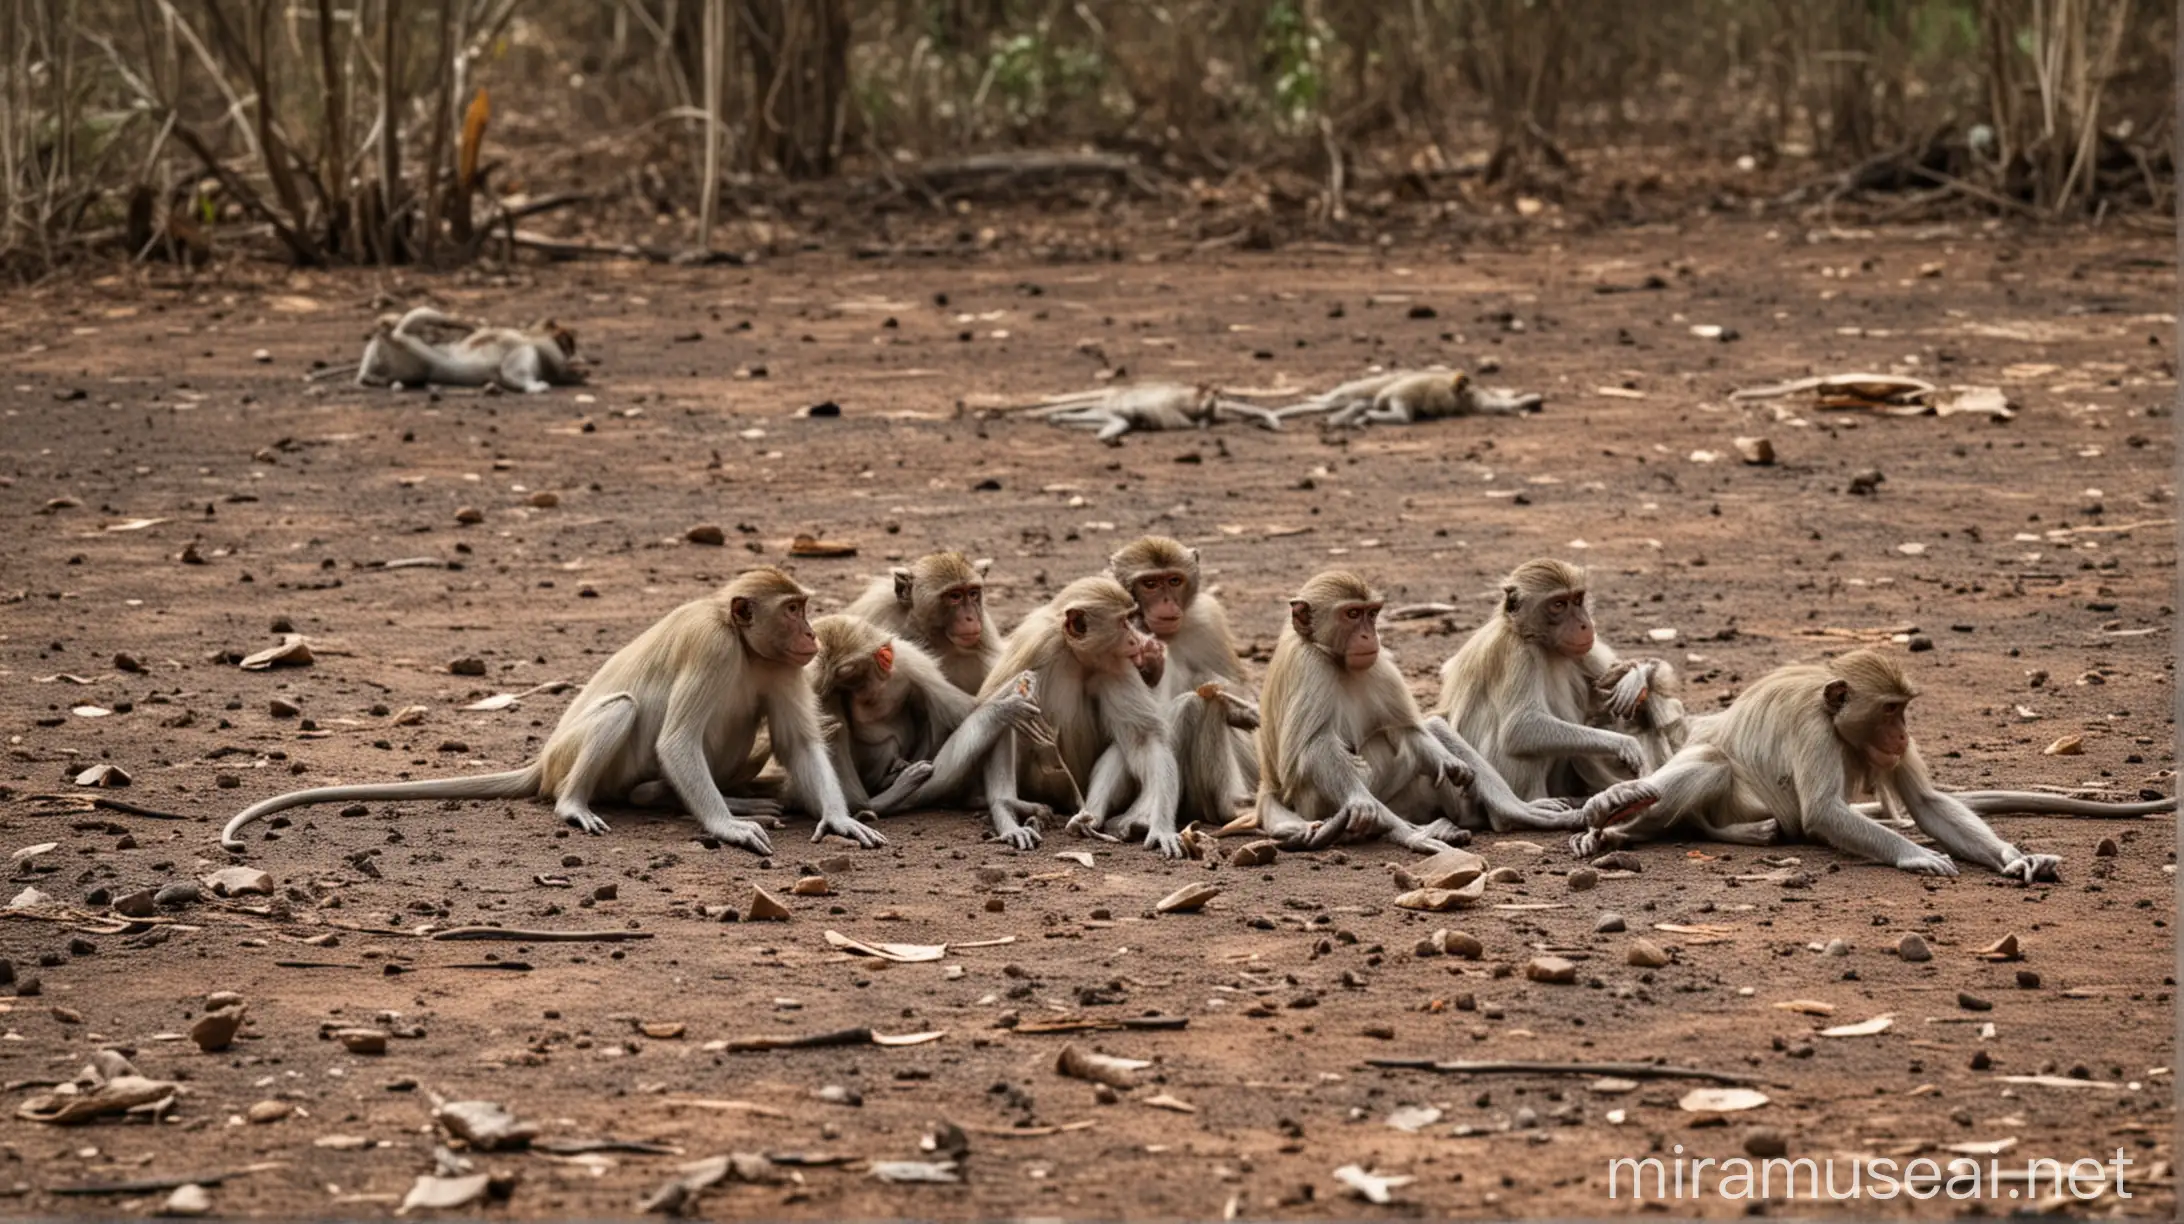 5 monkeys are lying dead near a dry pond in the forest